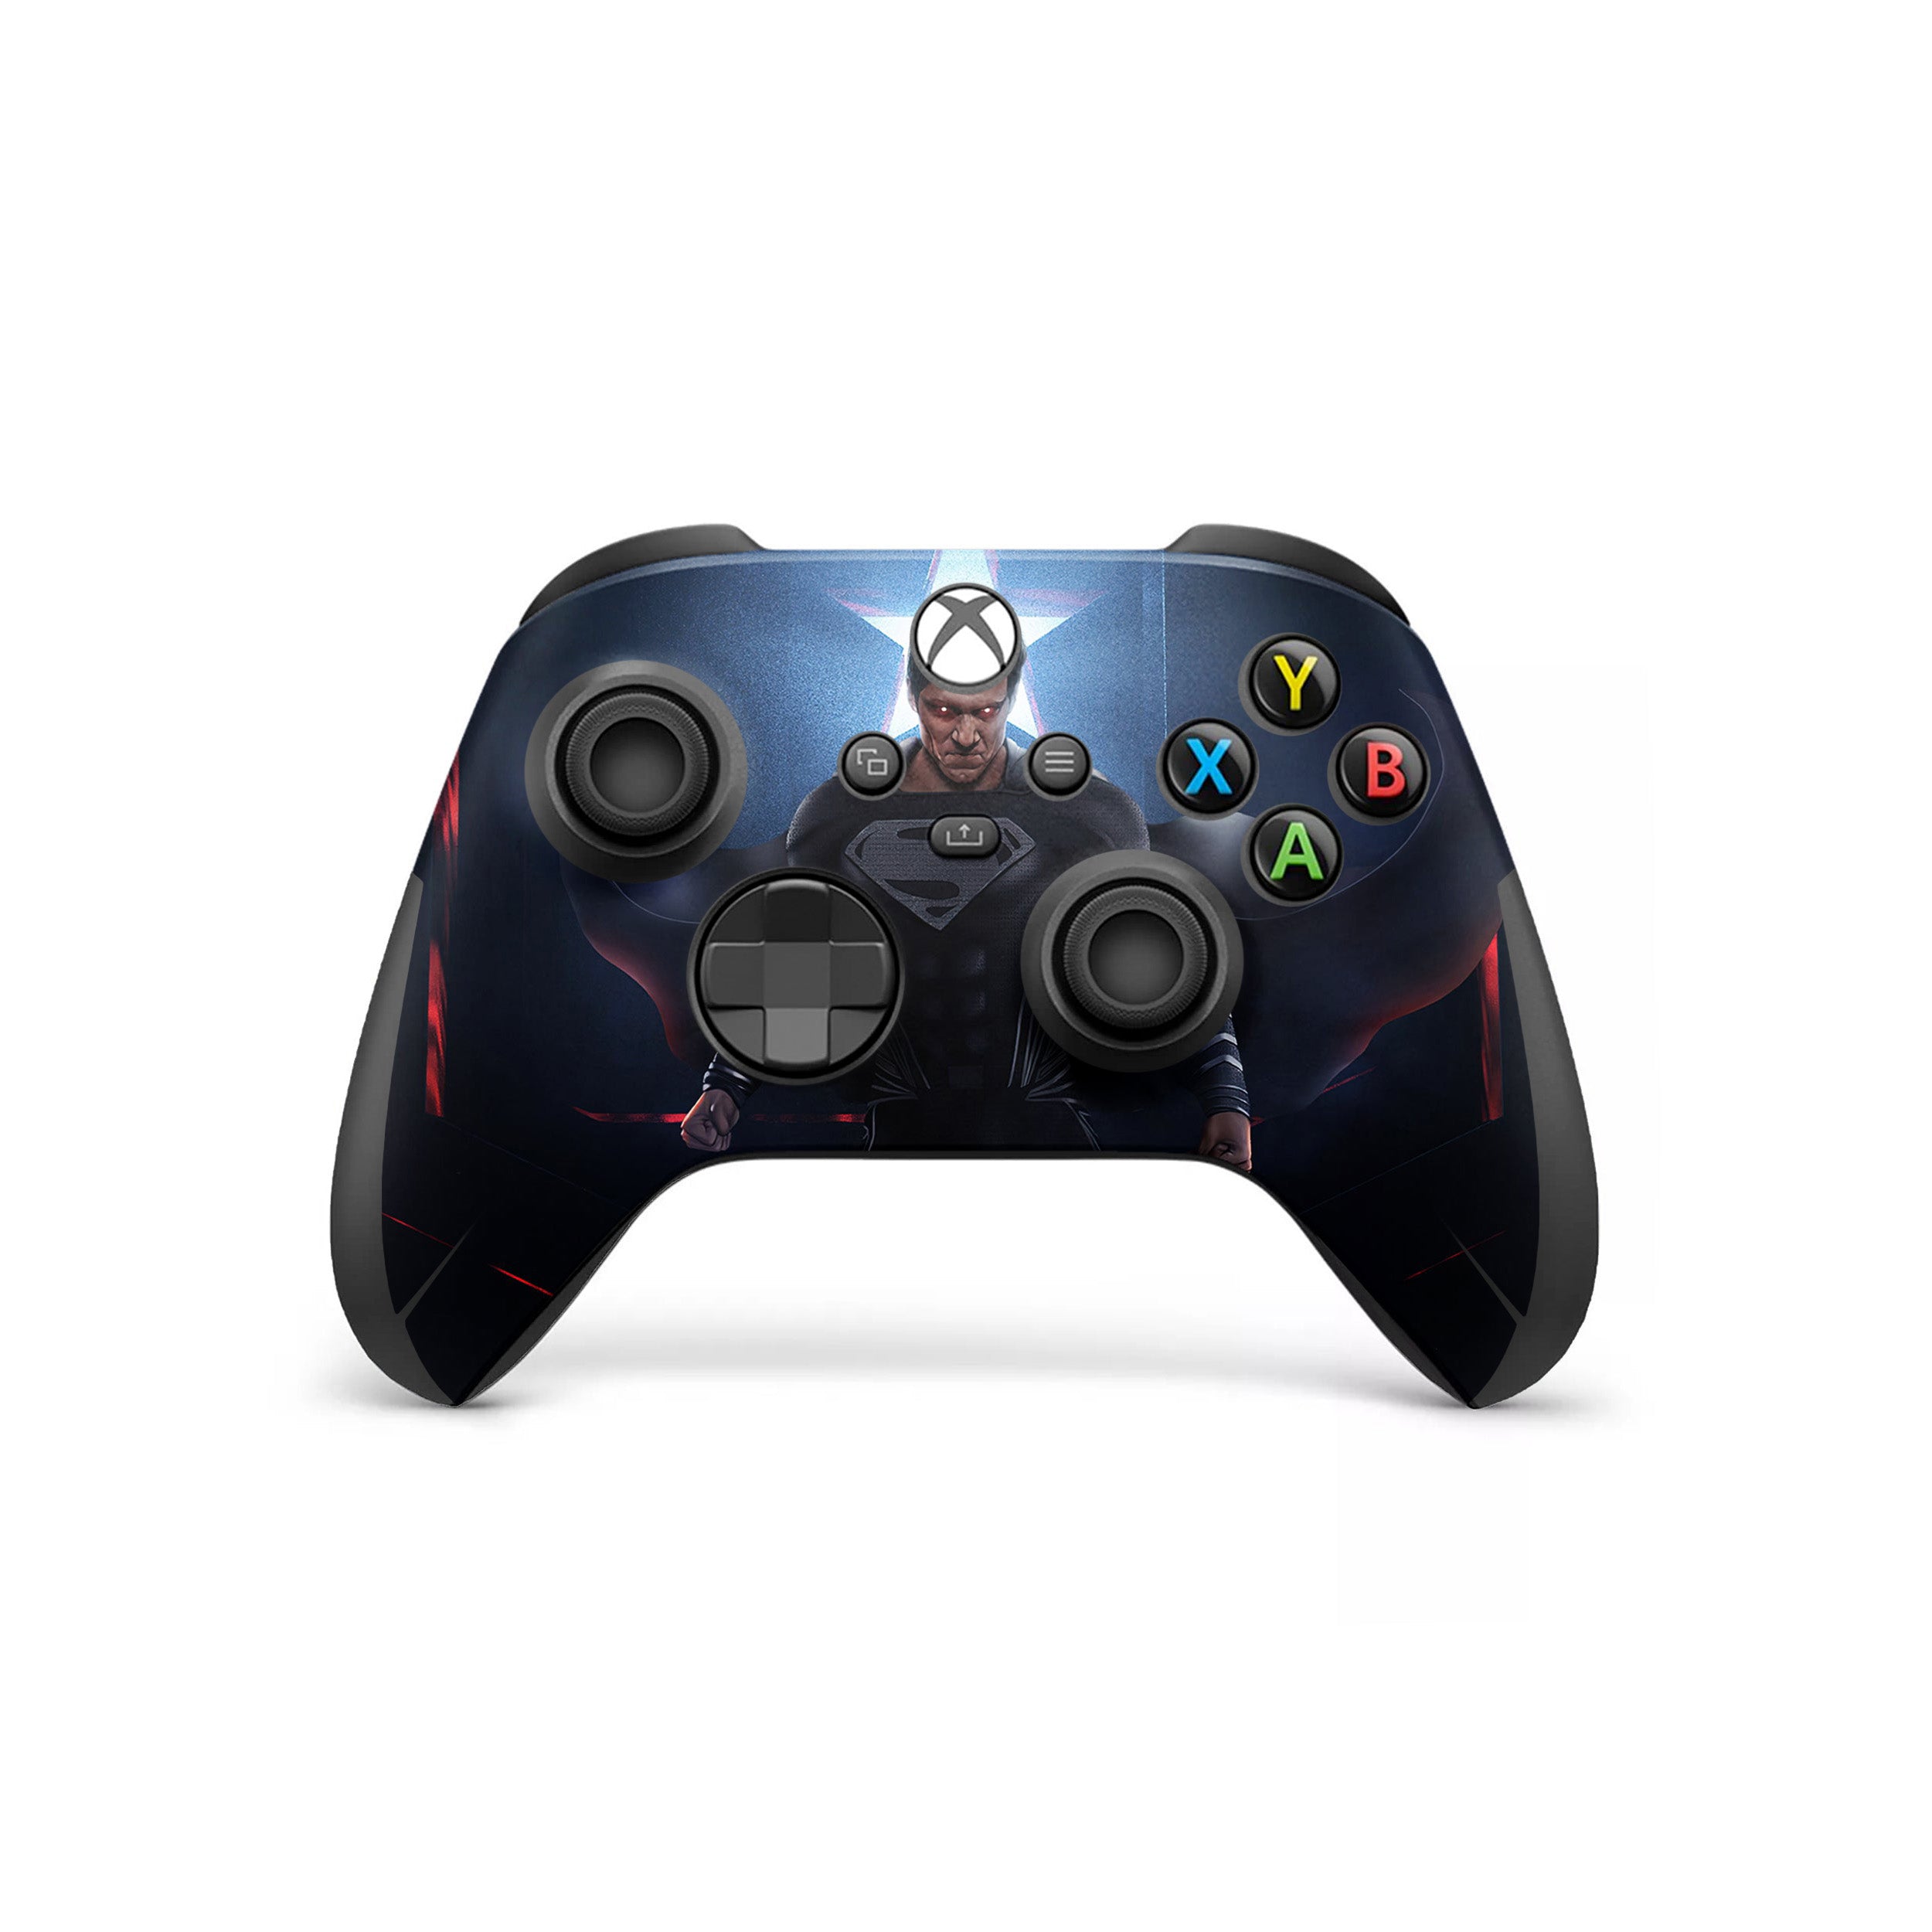 A video game skin featuring a DC Comics Superman design for the Xbox Wireless Controller.